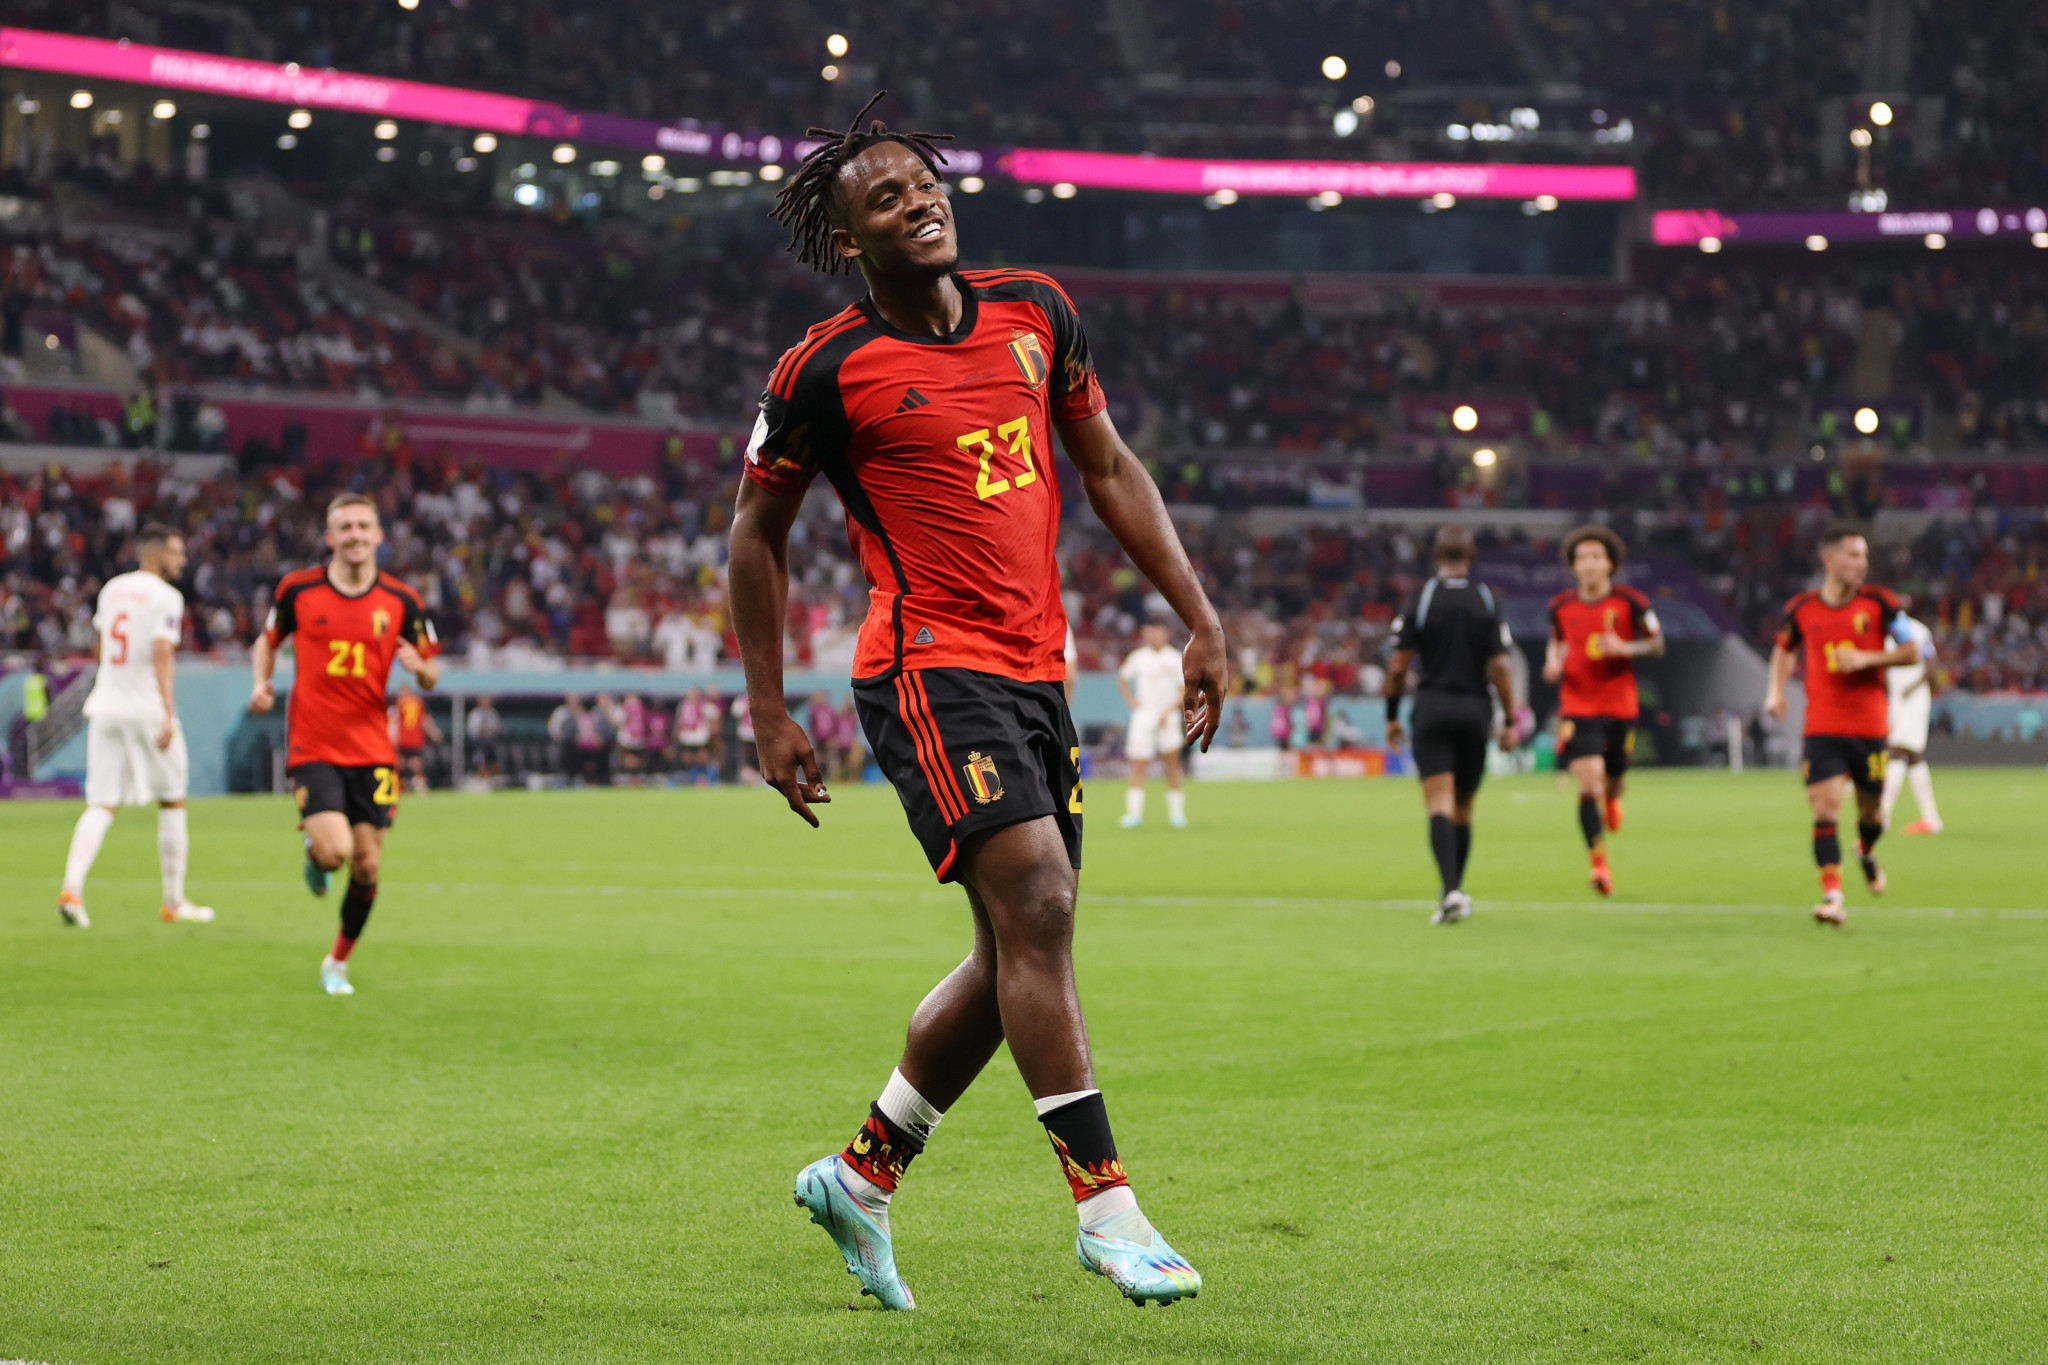 Michy Batshuayi scored the only goal as Belgium edged Canada ©Getty Images